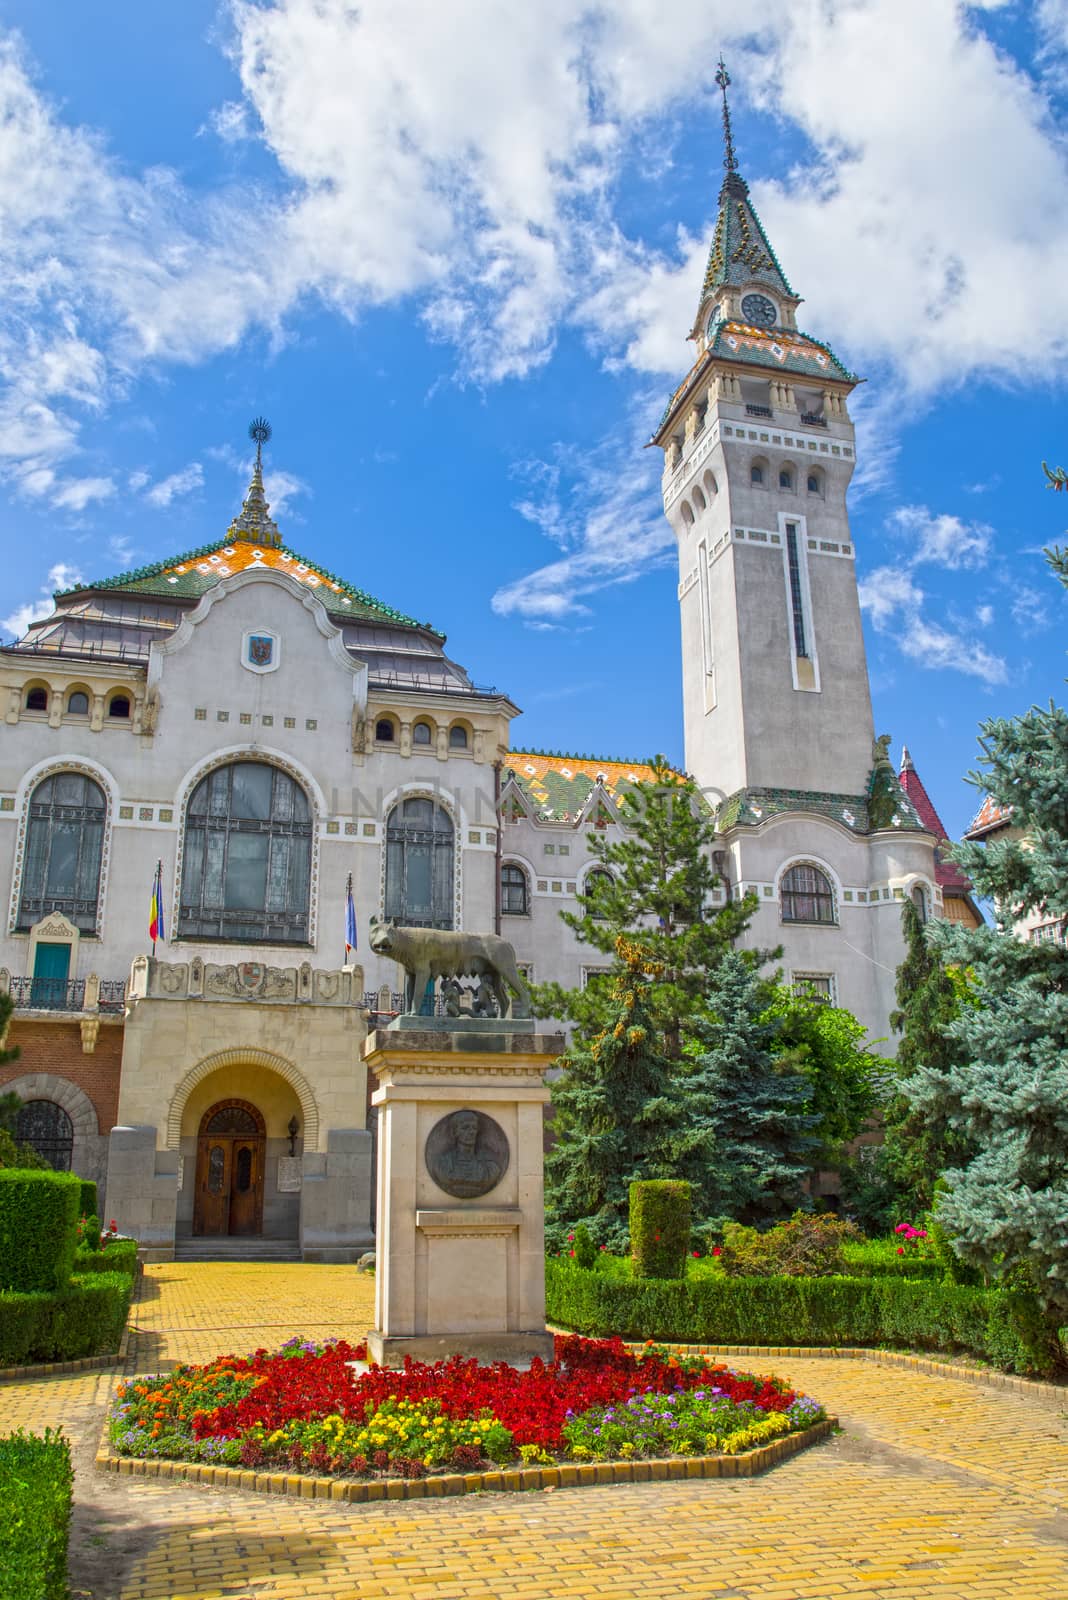 The Administrative Palace of Targu Mures by savcoco